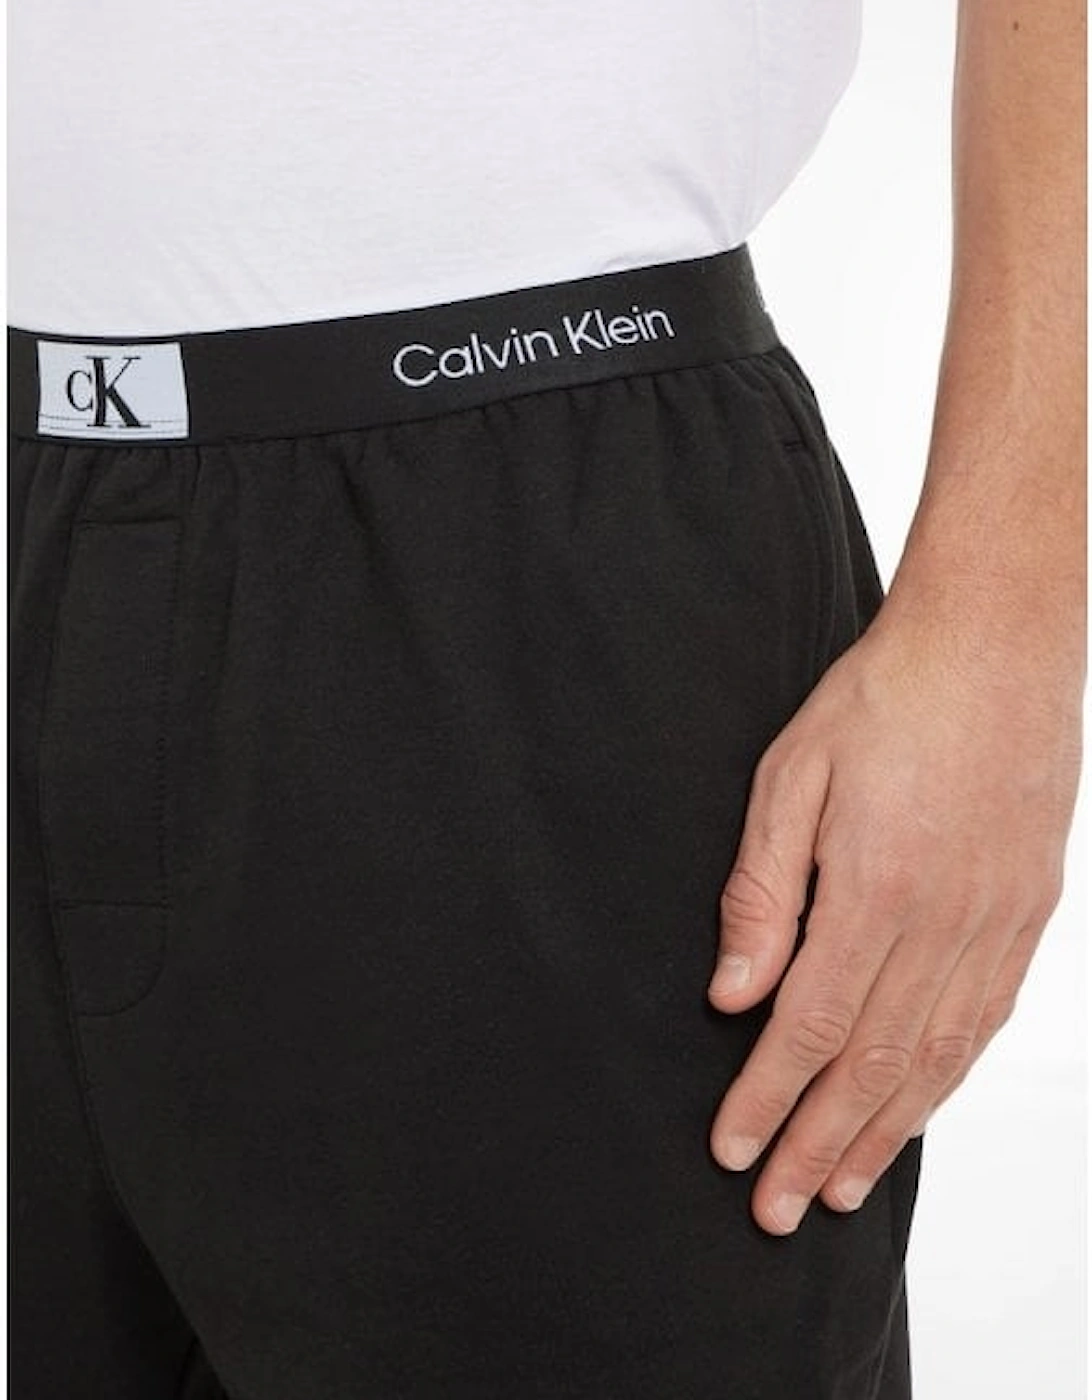 CK 96 French Terry Jogging Shorts, Black